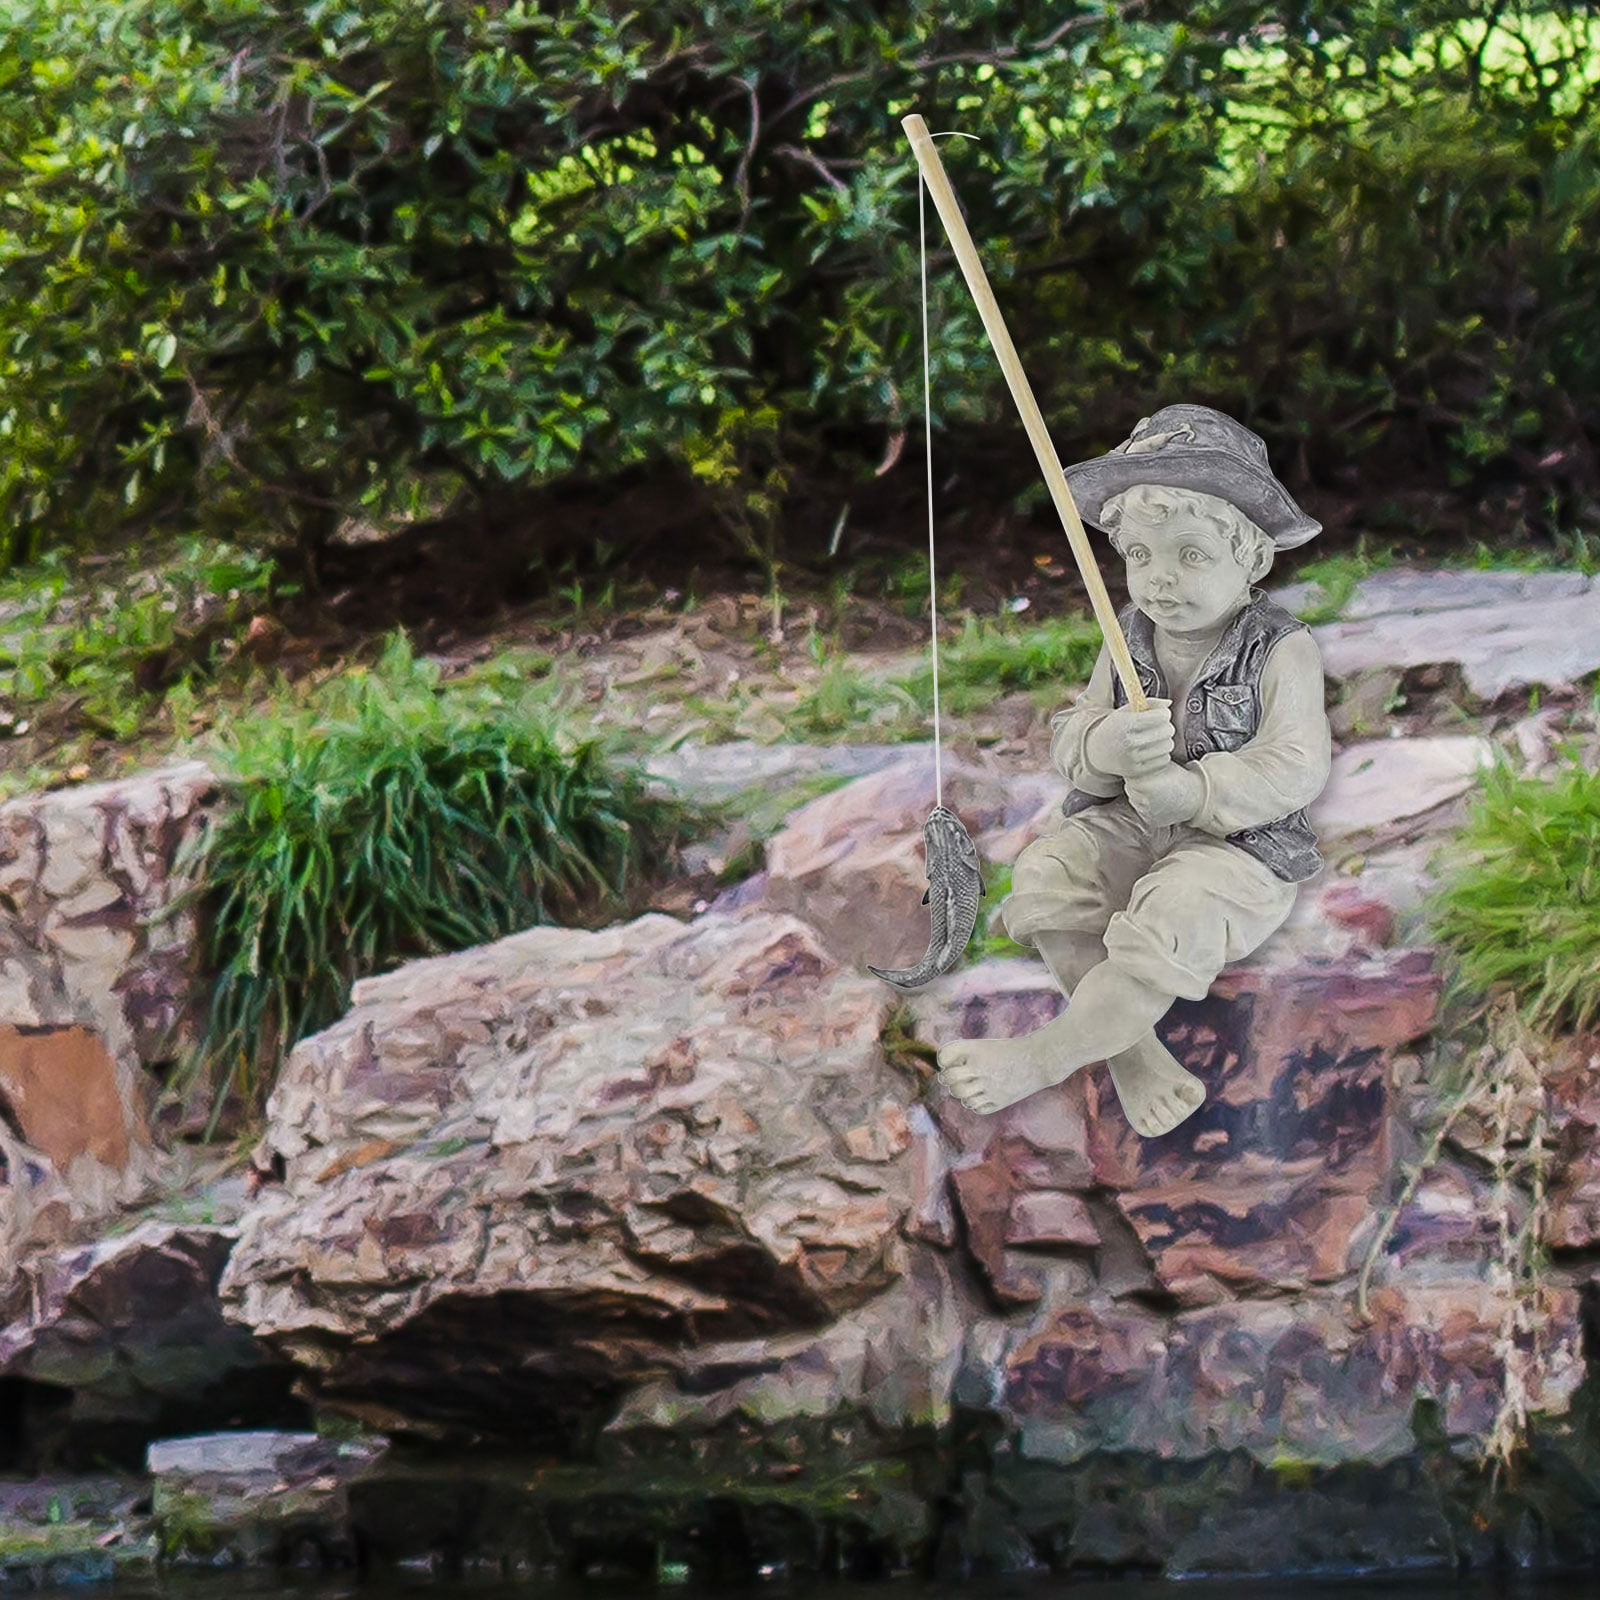 3d Resin Garden Statue Of A Fisherman Boy, For Home, Outdoor, Lawn, Yard,  Garden Decoration For Outdoor, Patio, Yard, Lawn (hy)